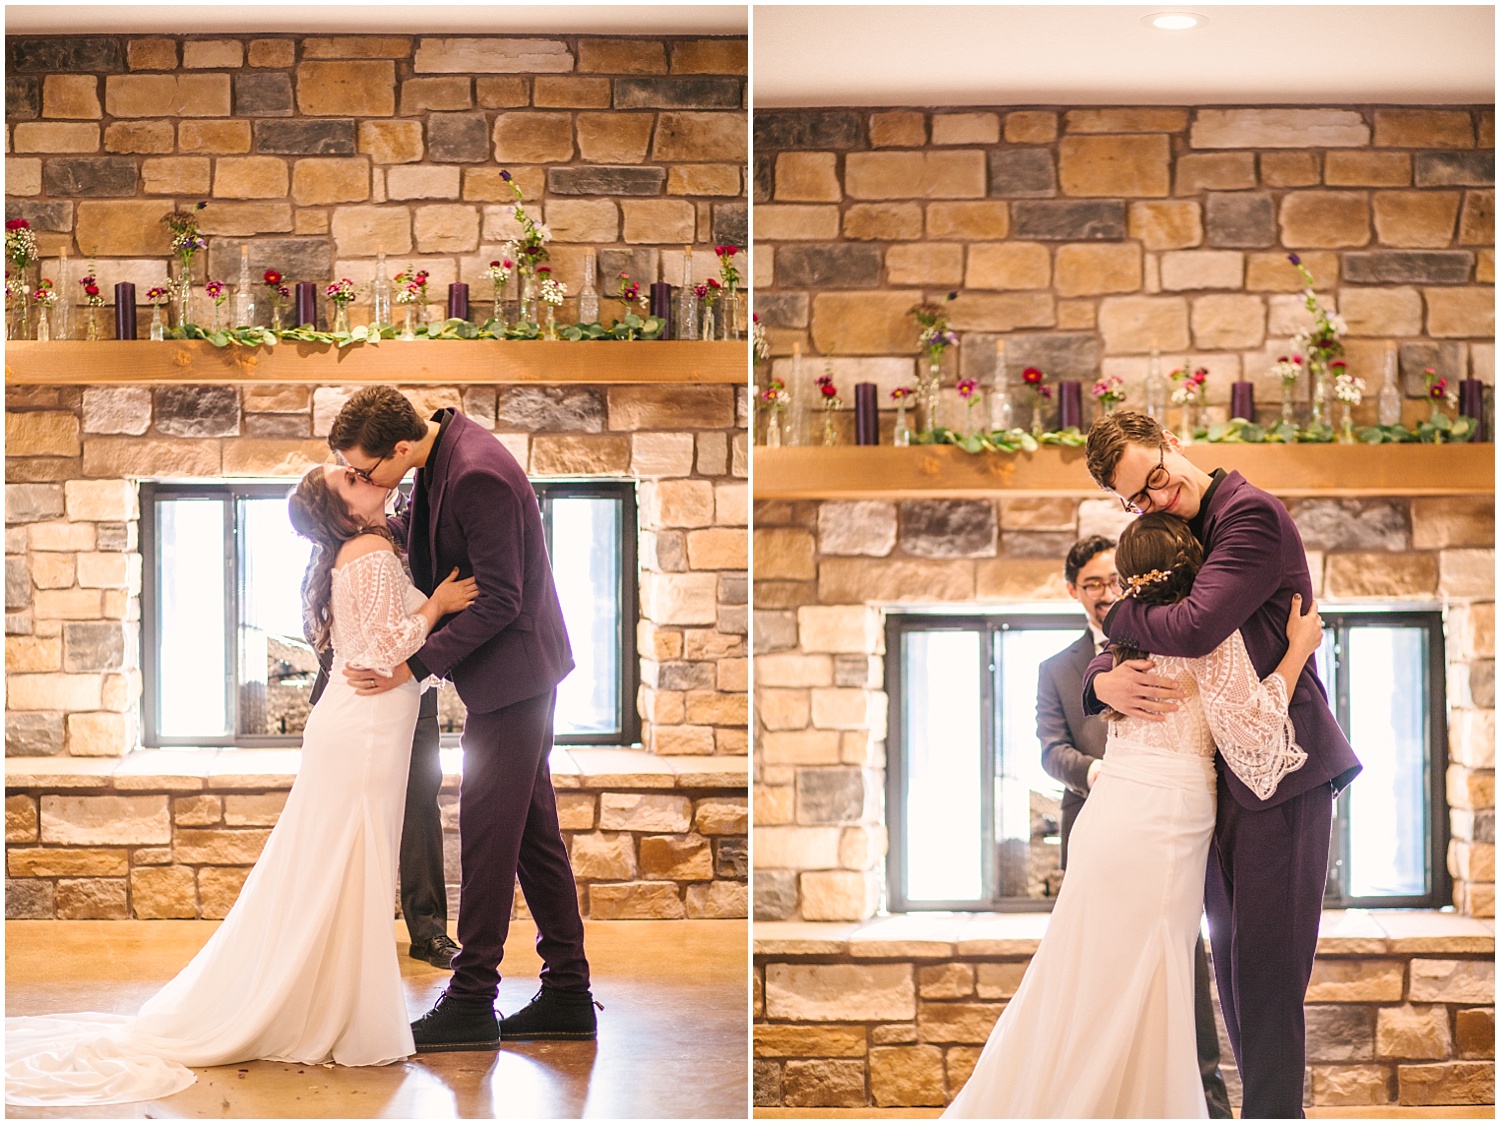 Bride and groom's first kiss at Hearth House Venue wedding in Monument, Colorado